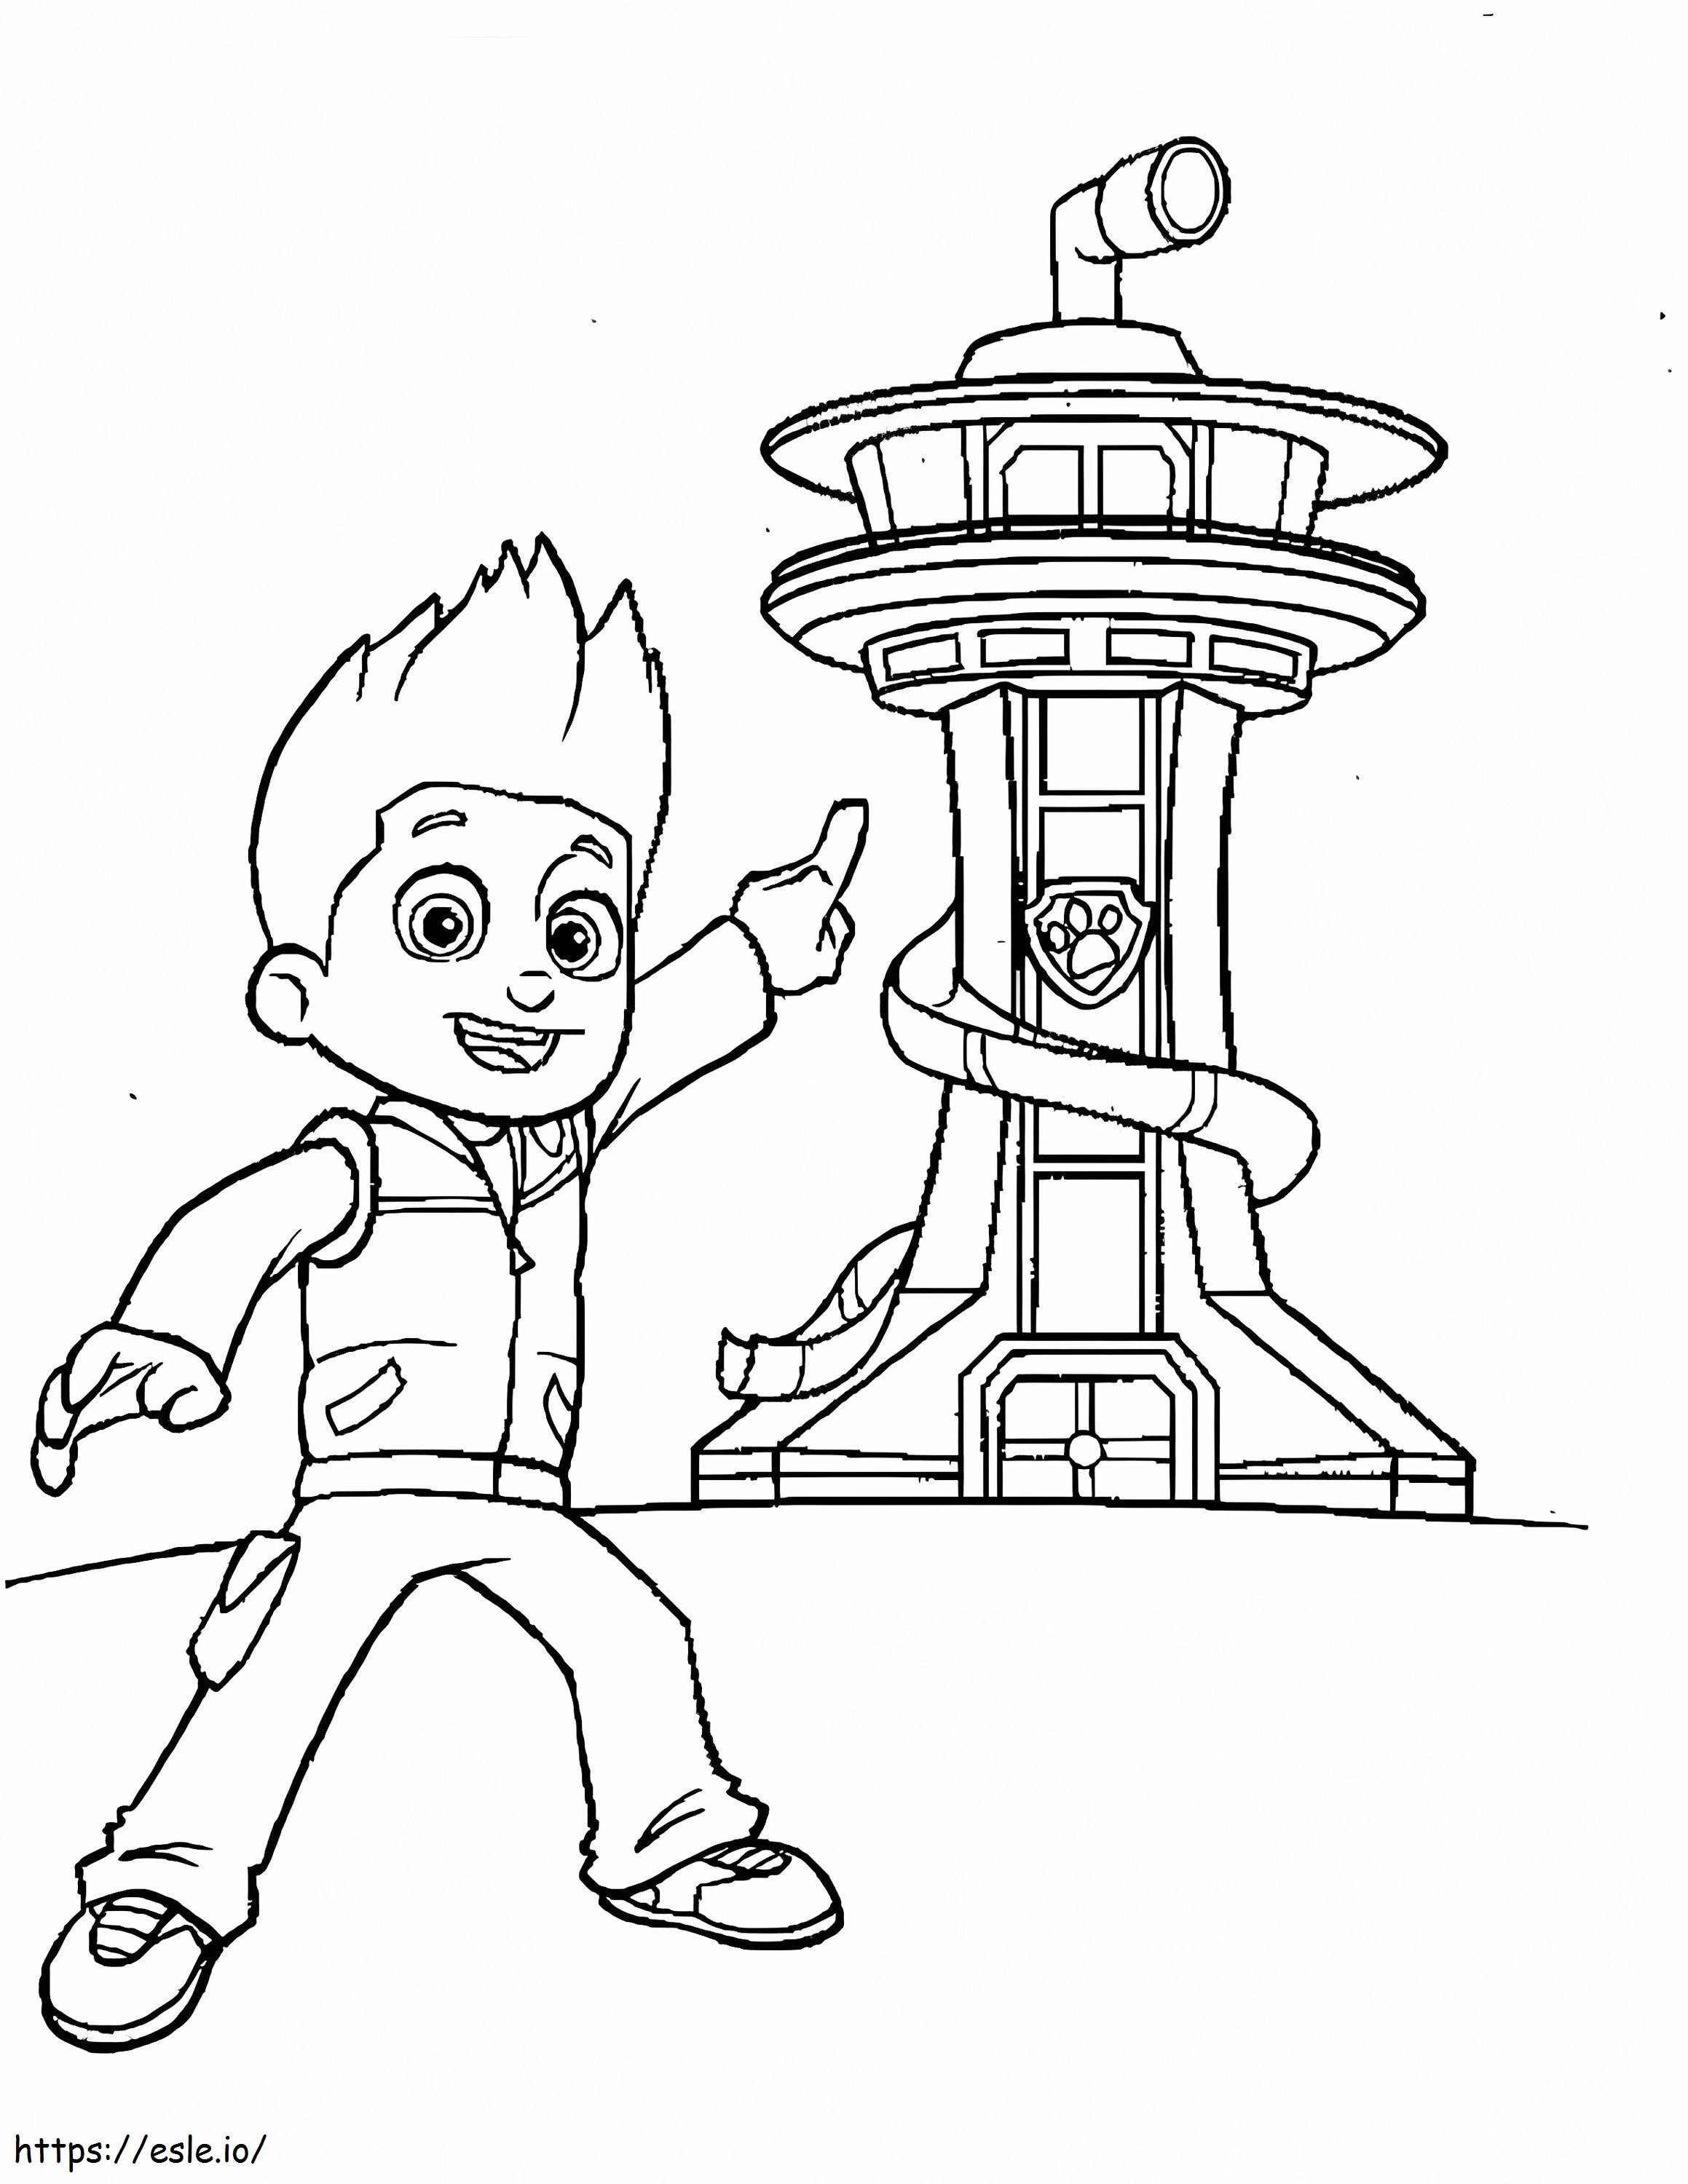 Canine Patrol Watchtower coloring page